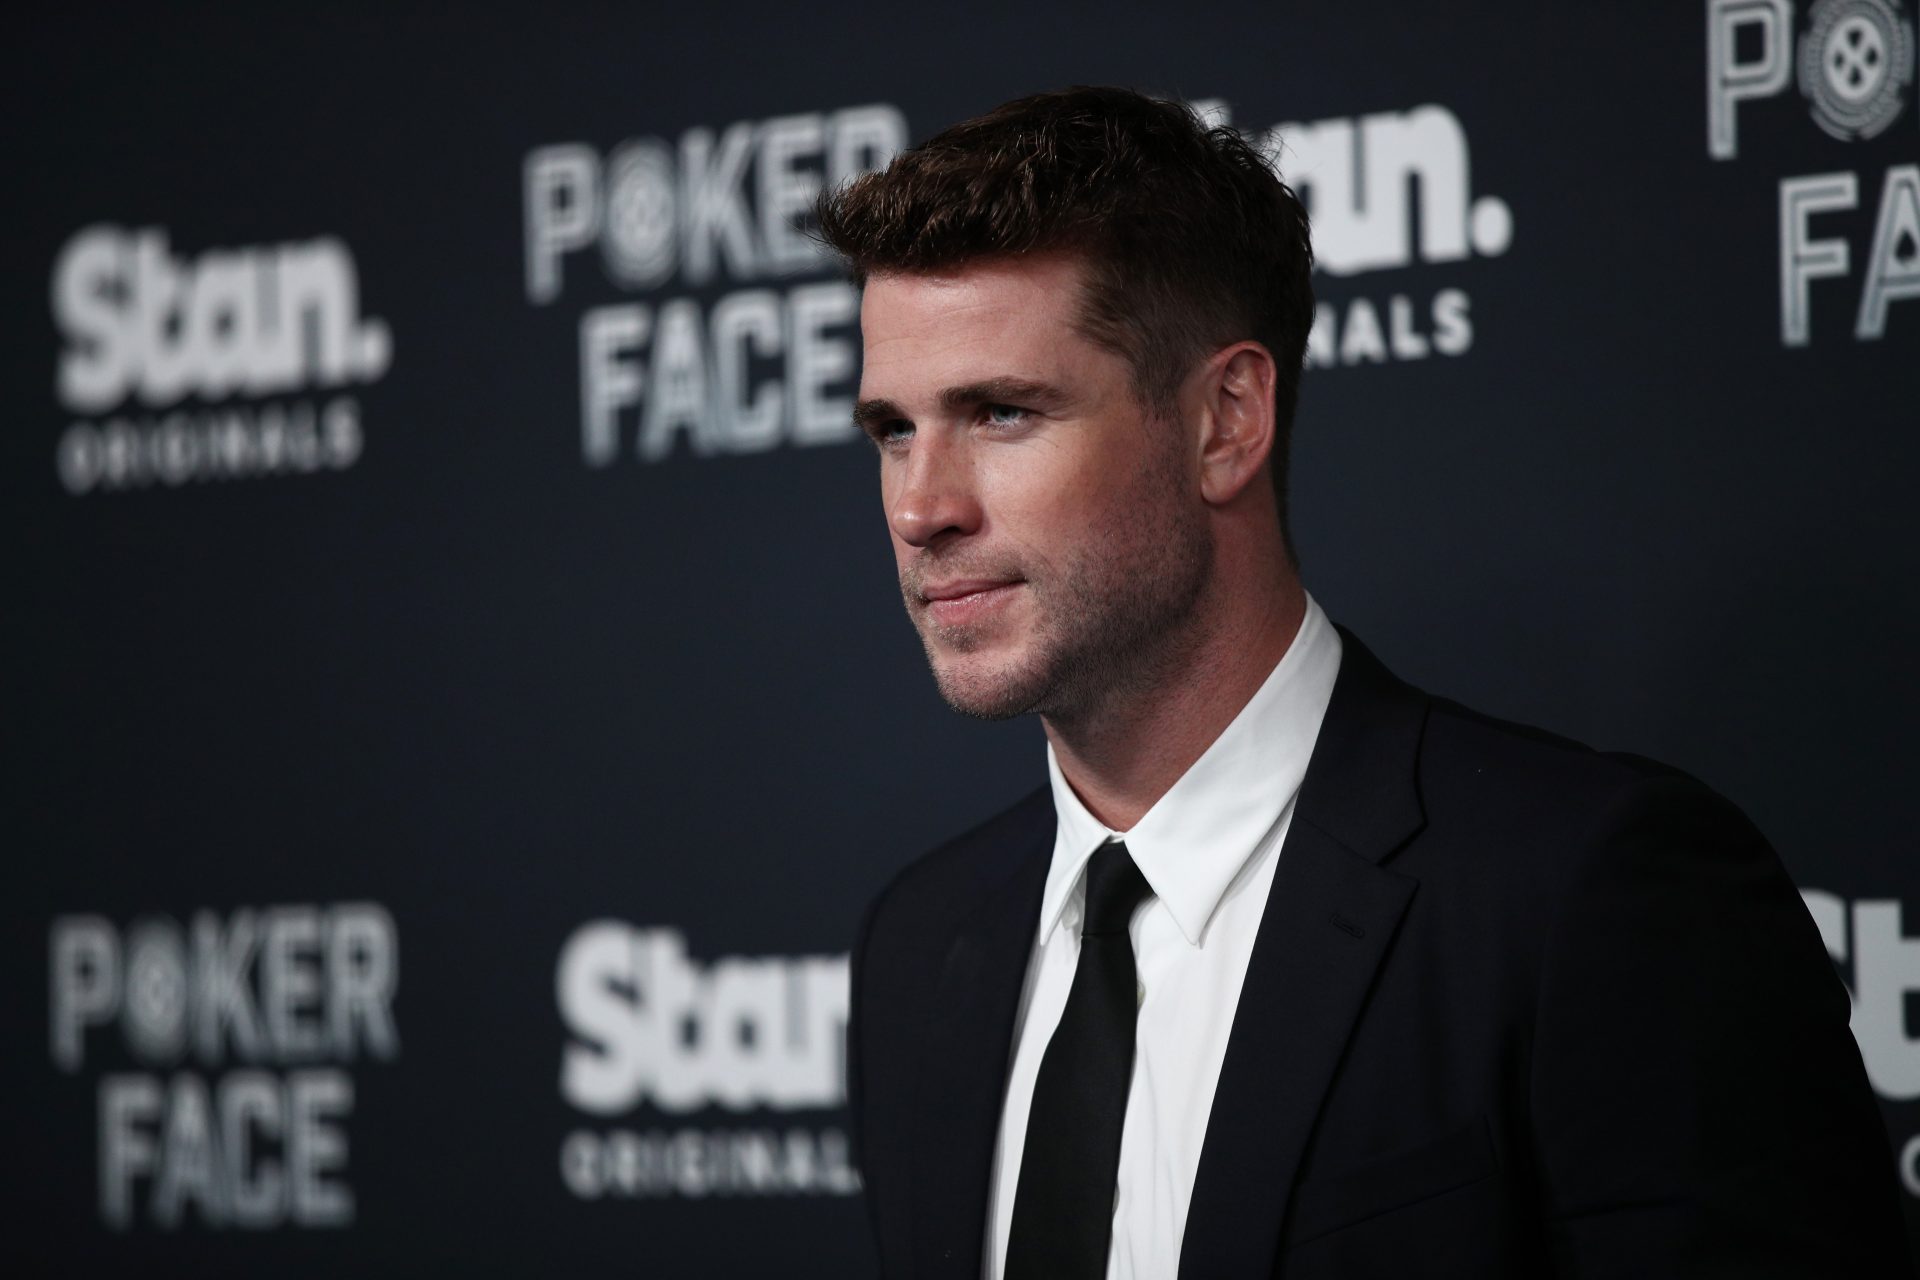 Liam Hemsworth is the youngest Hemsworth brother